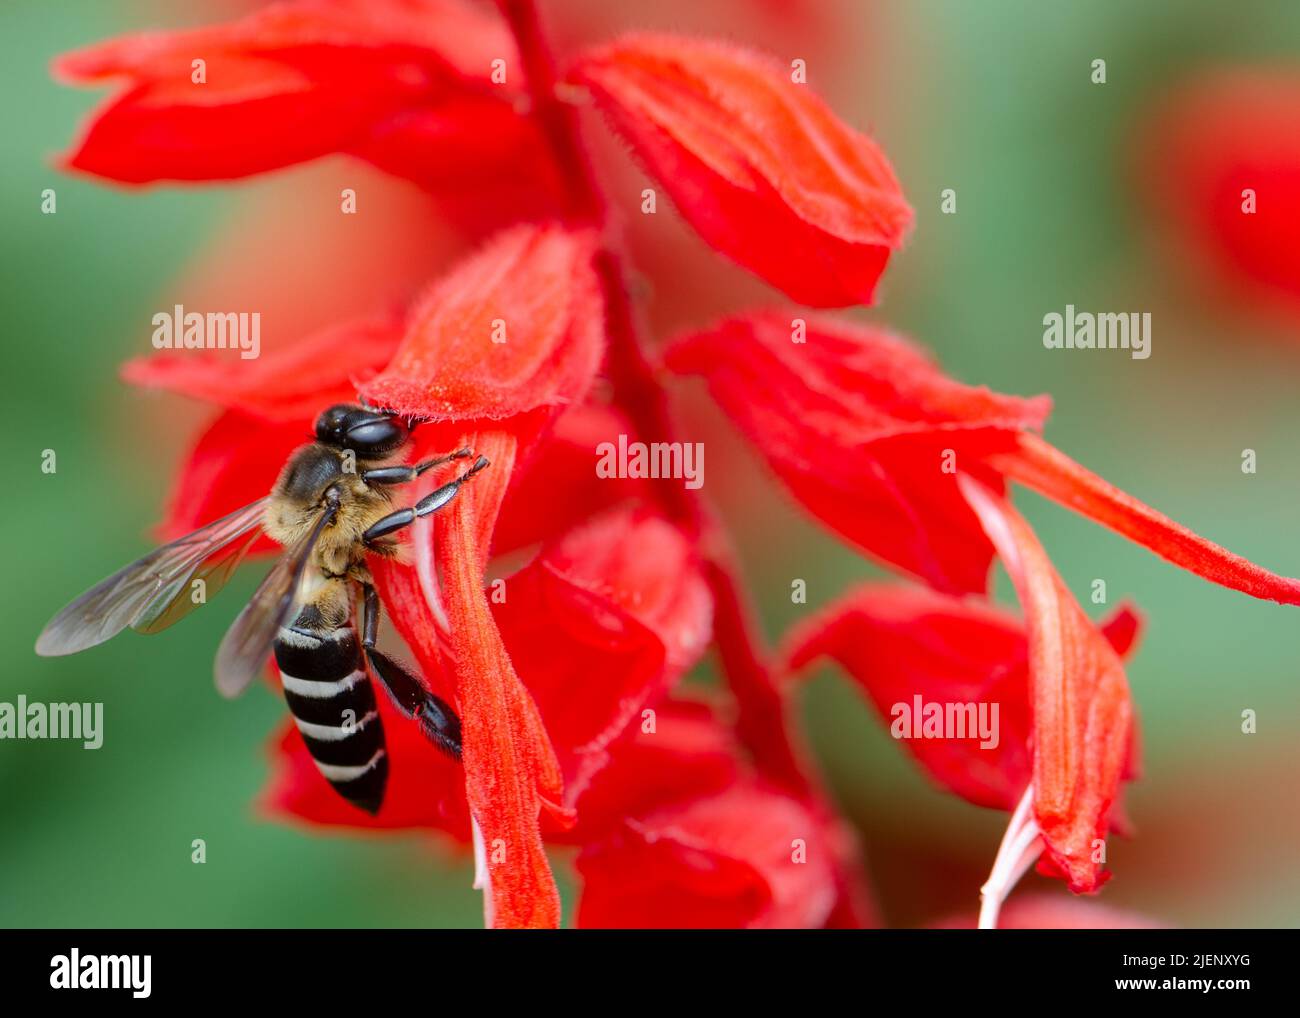 A black and white stripe bee on a Salvia or Scarlet Sage Flower Stock Photo